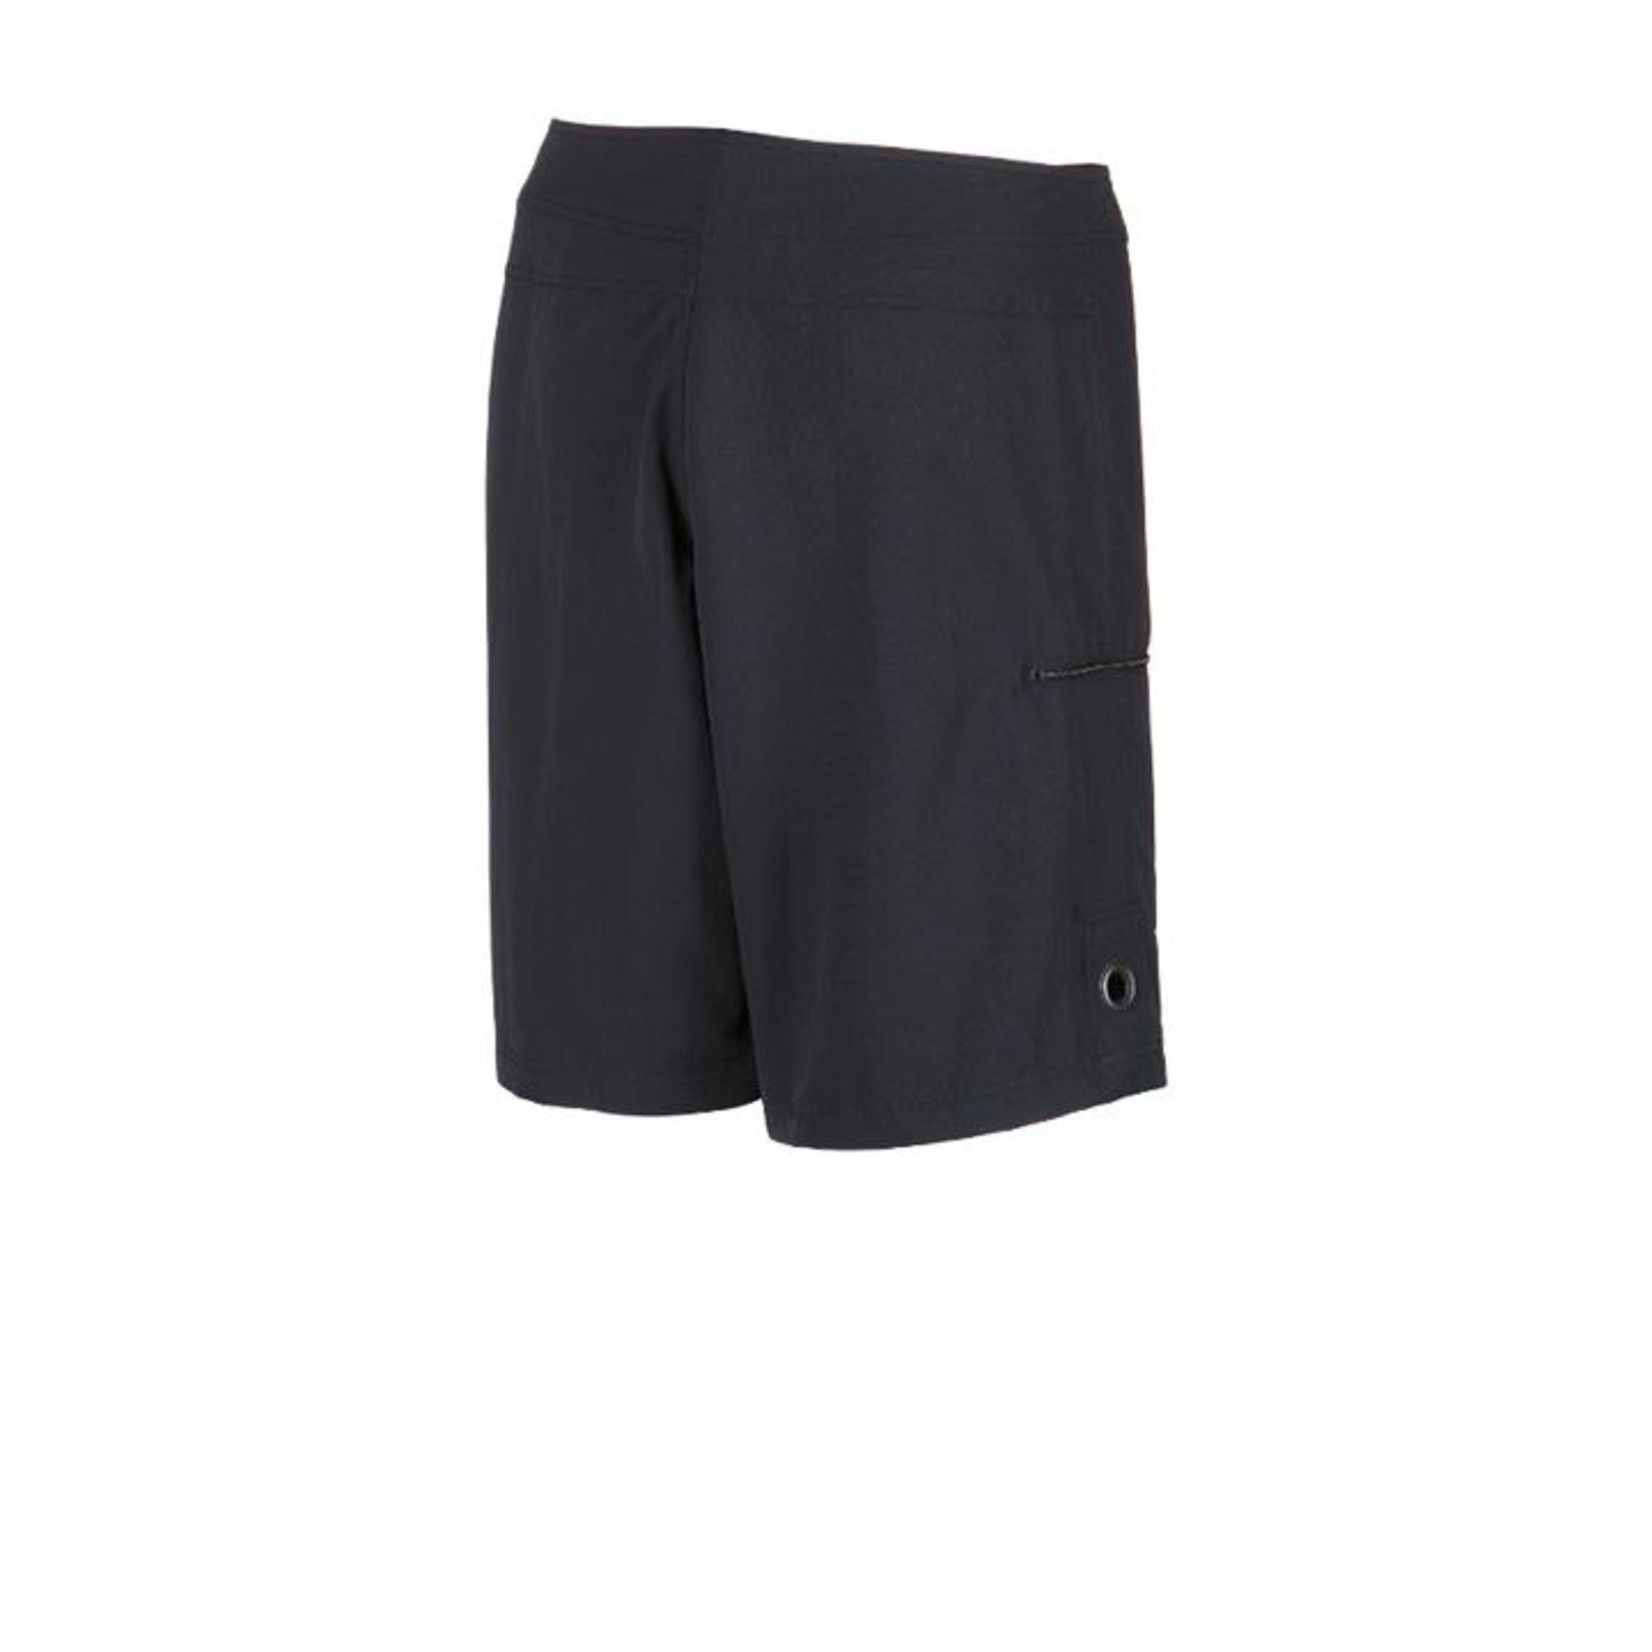 Immersion Research Immersion Research Men's Guide Shorts